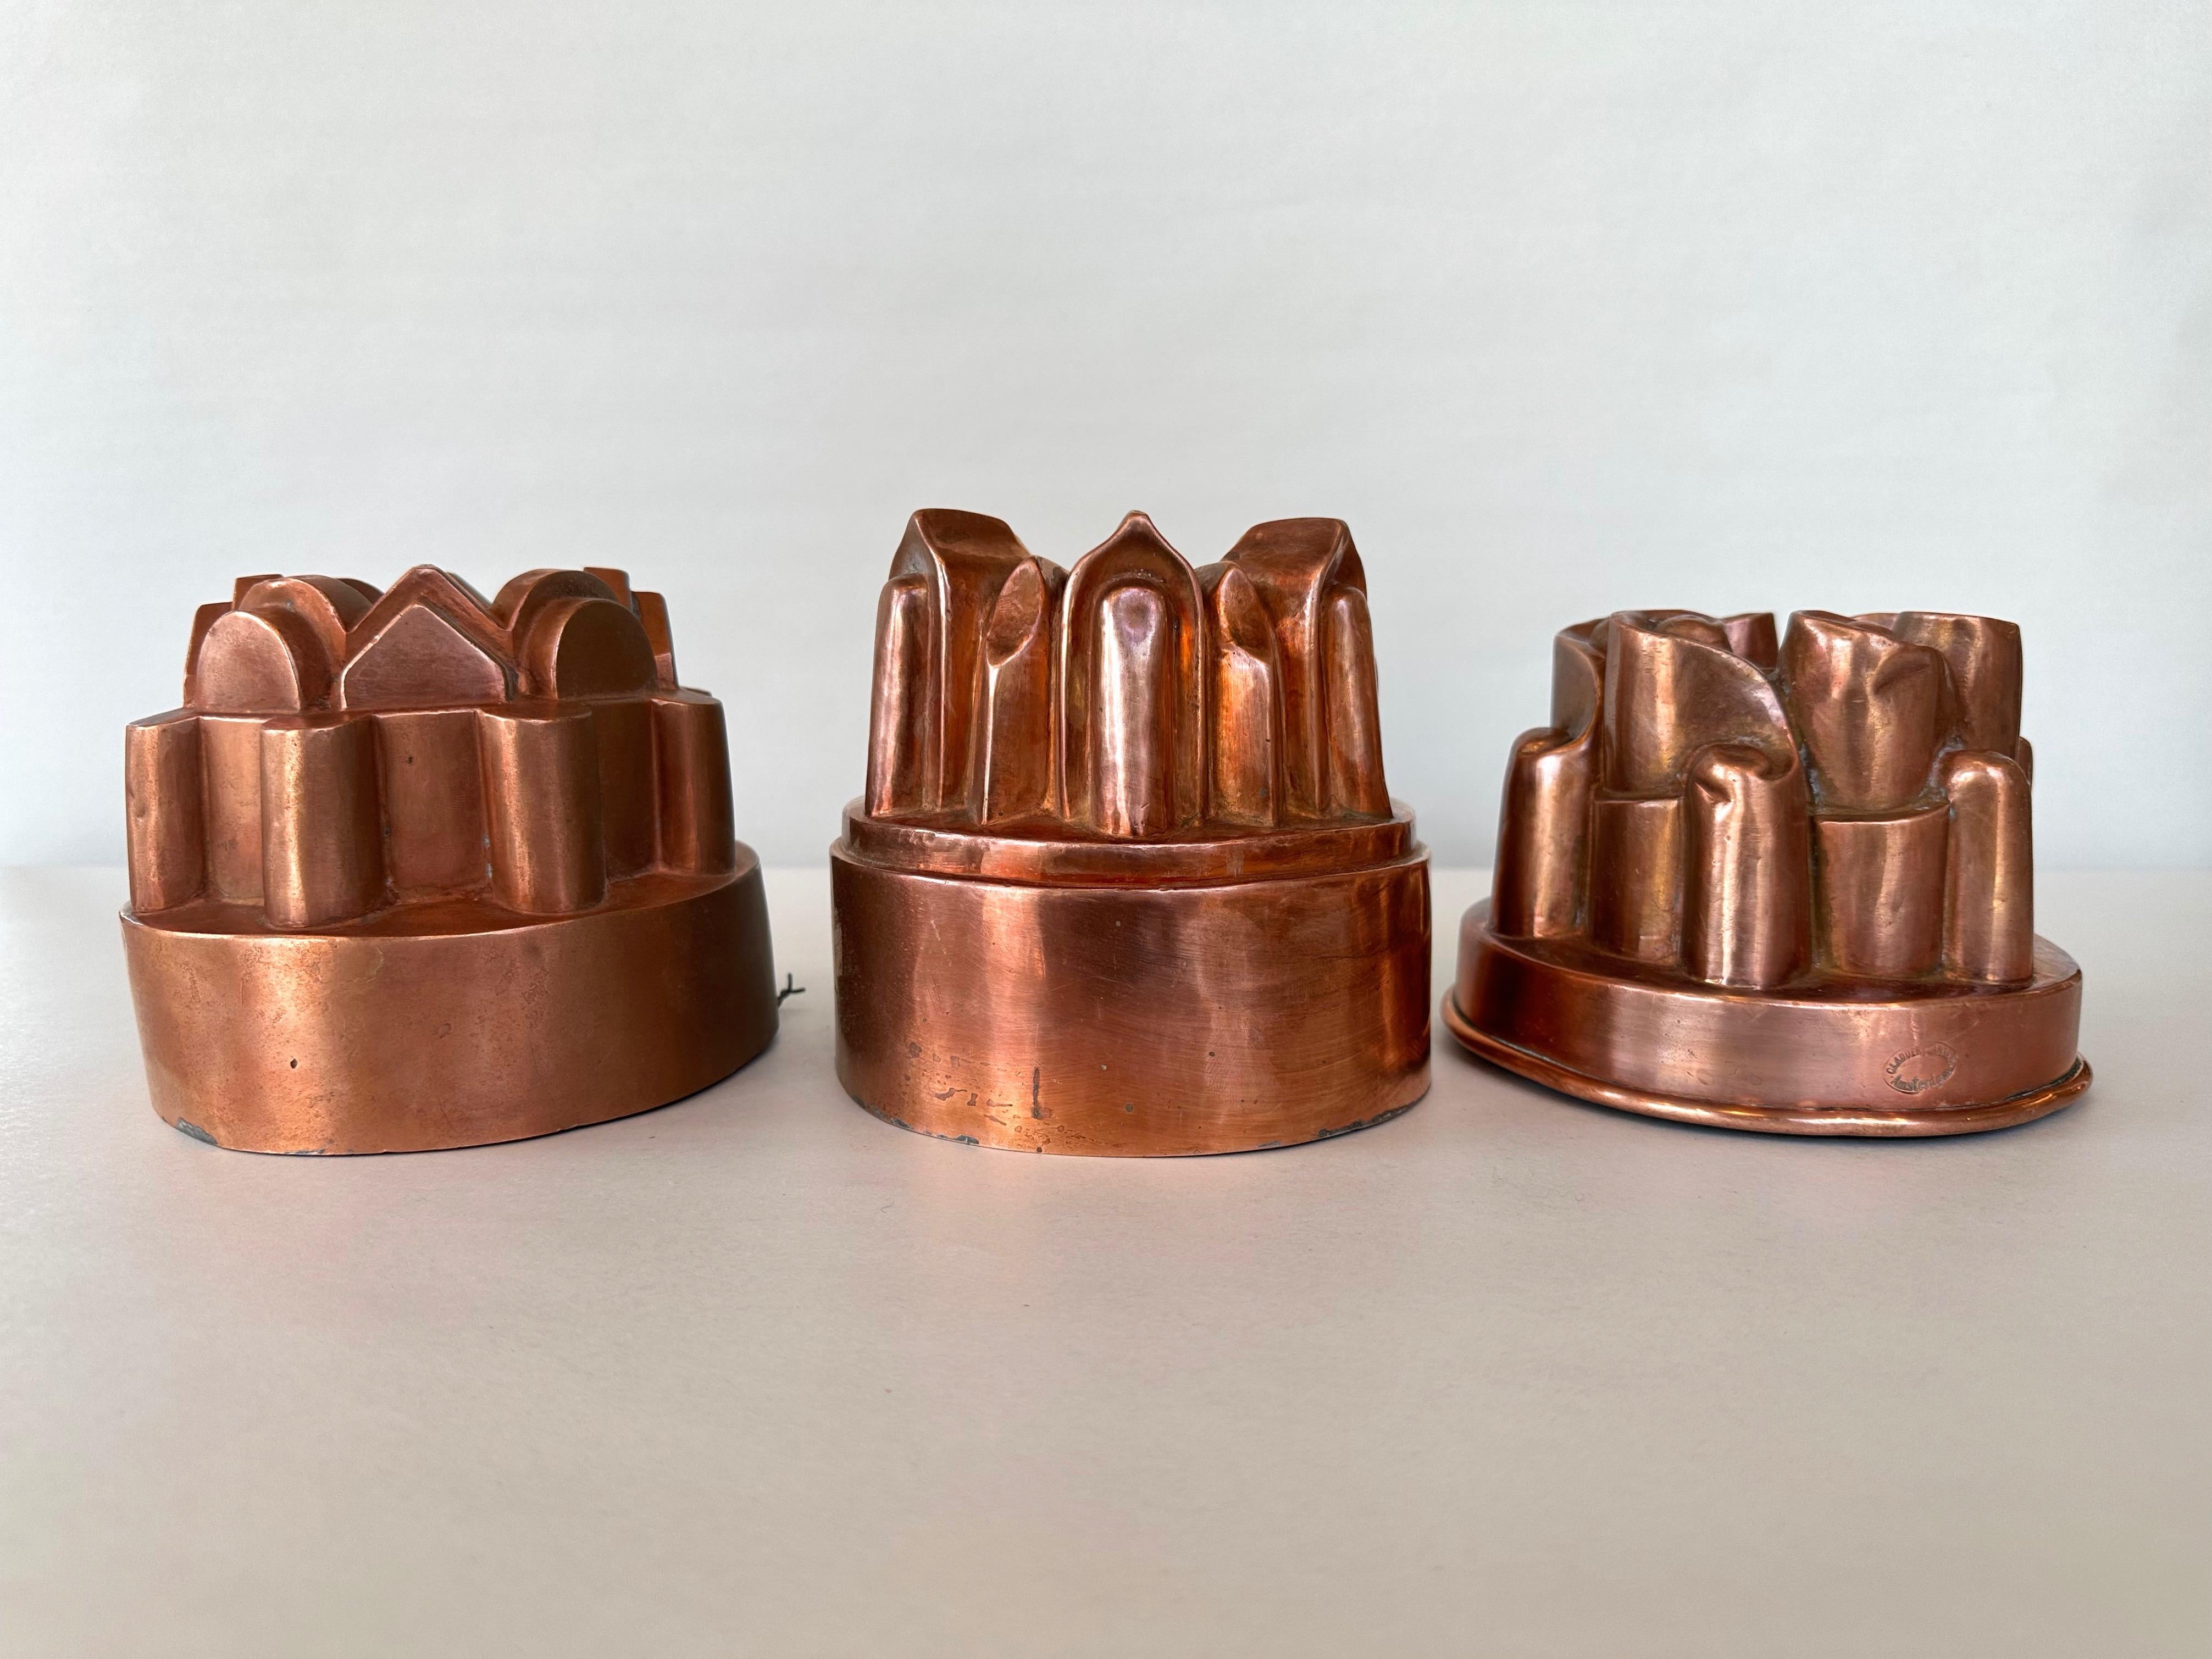 A charming set of three circa 1910 architectural and whimsical copper cake, jelly, or pudding baking molds from France and the Netherlands, with two bearing maker’s marks.

Described as pictured from left to right:

Mold at left with a crisply-done